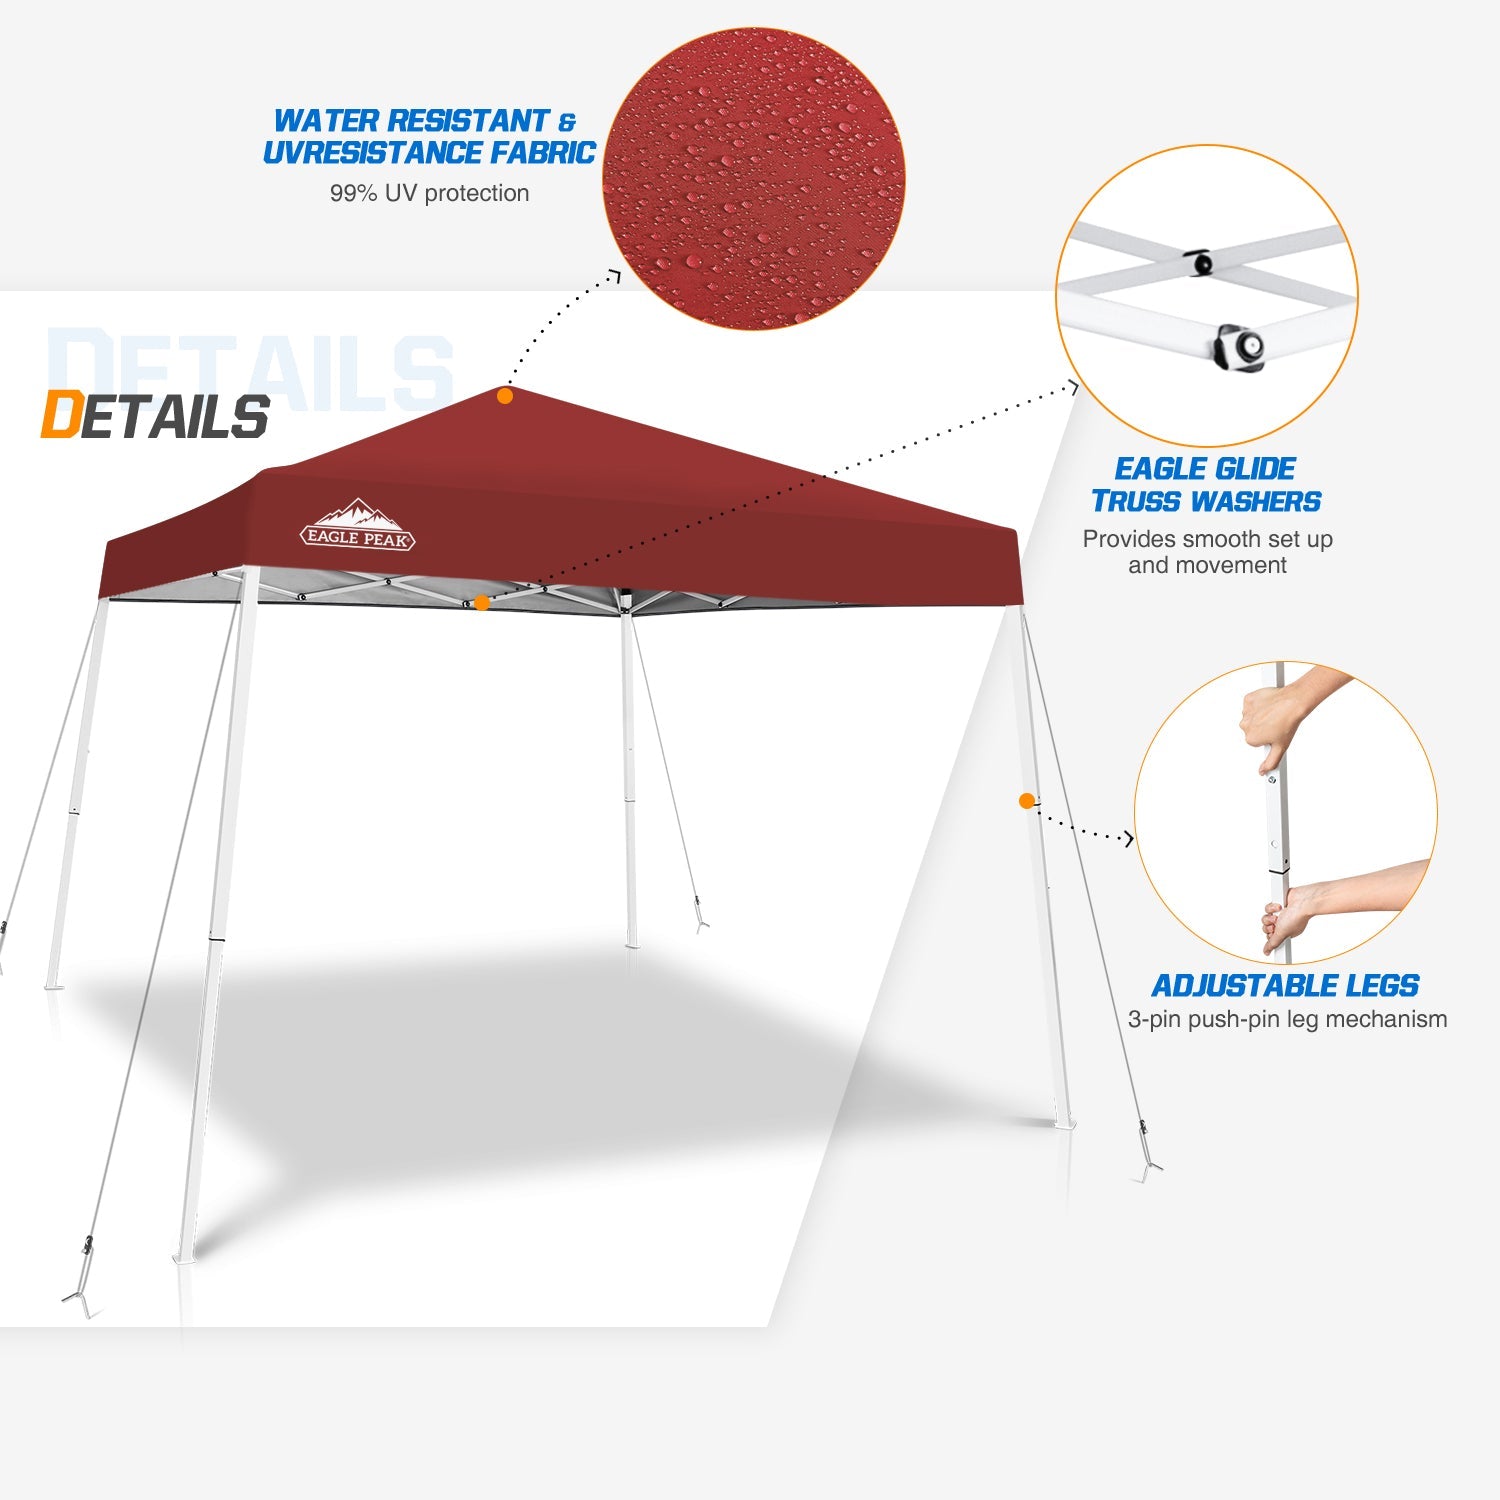 EAGLE PEAK 10' x 10' Slant Leg Pop-up Canopy Tent Easy One Person Setup Instant Outdoor Canopy Folding Shelter with 64 Square Feet of Shade